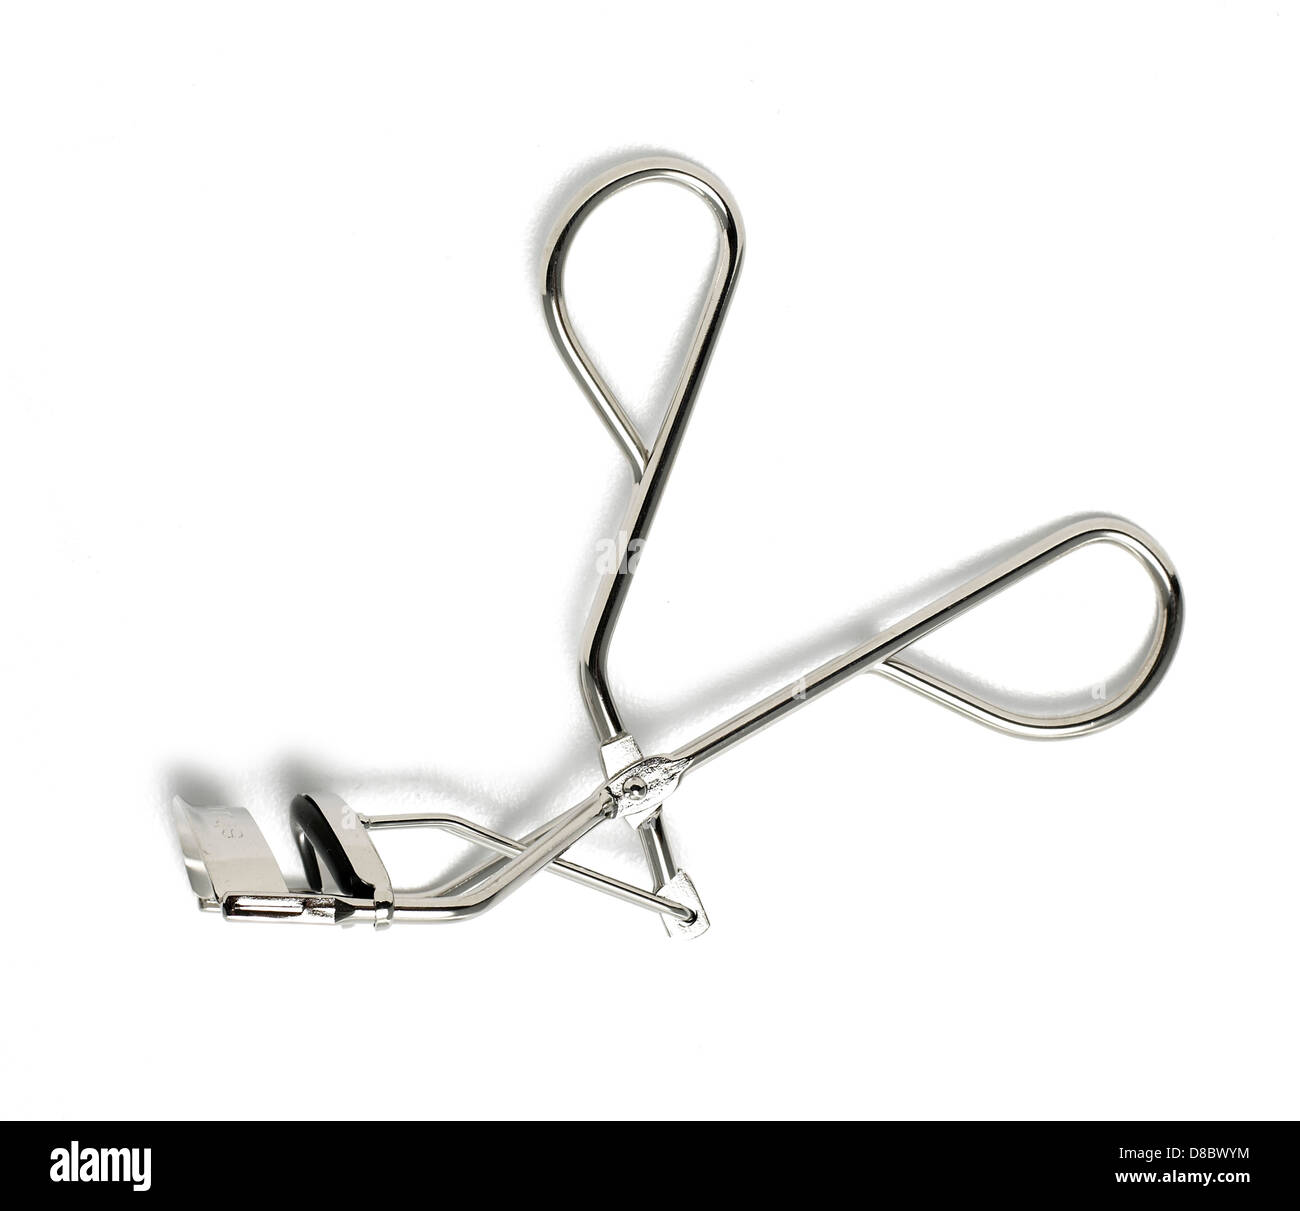 silver metal eyelash curlers cut out onto a white background Stock Photo